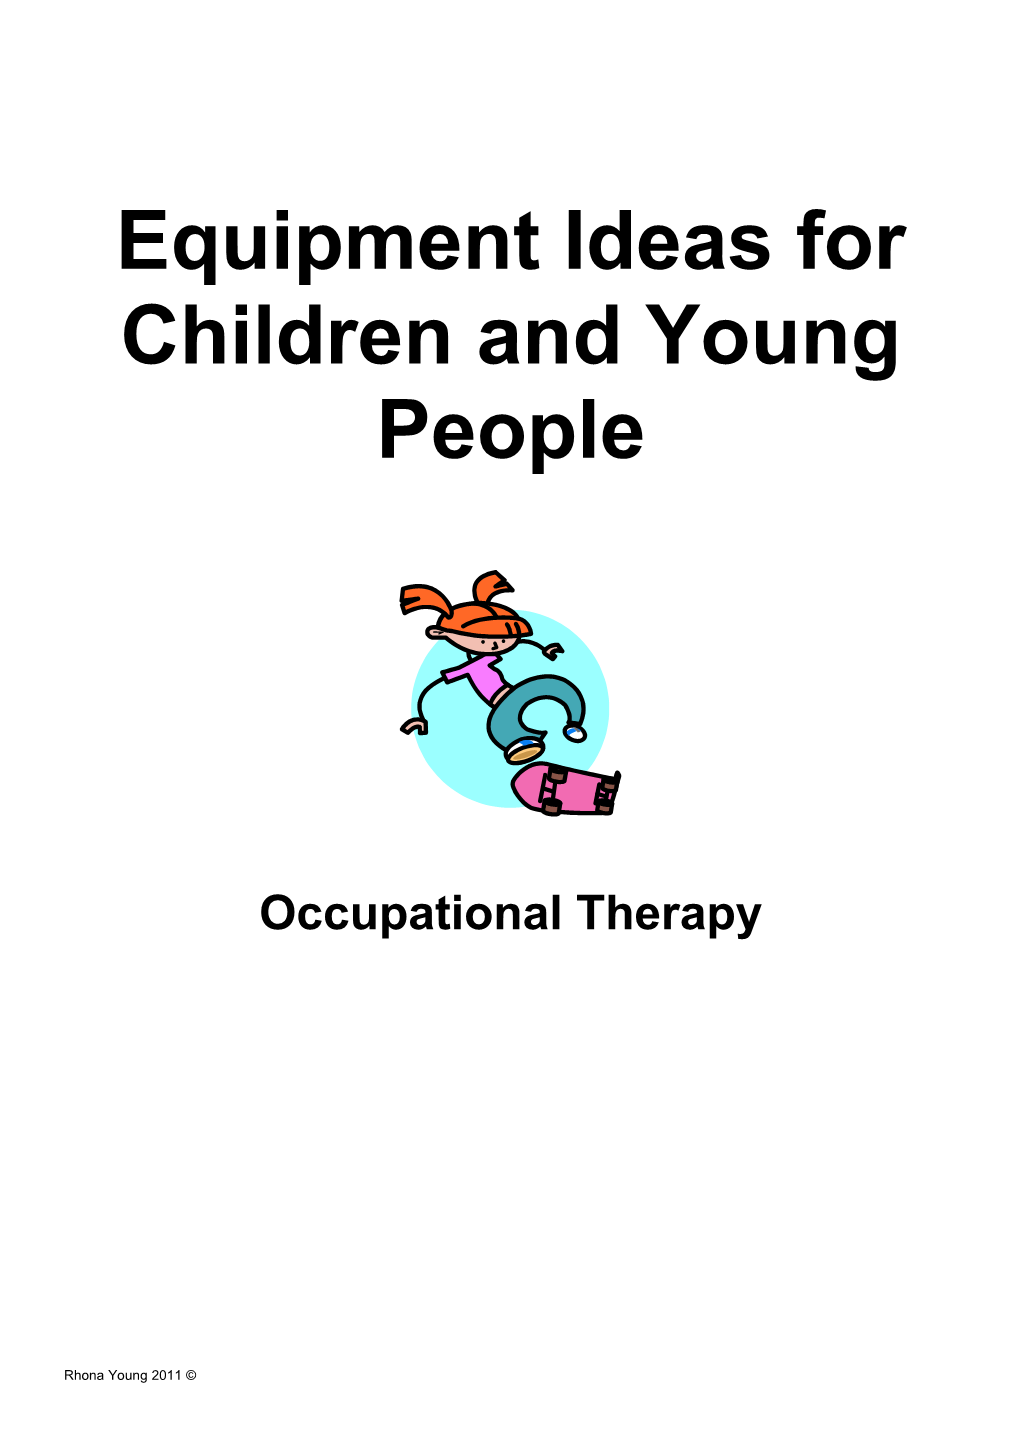 Equipment Ideas for Children and Young People